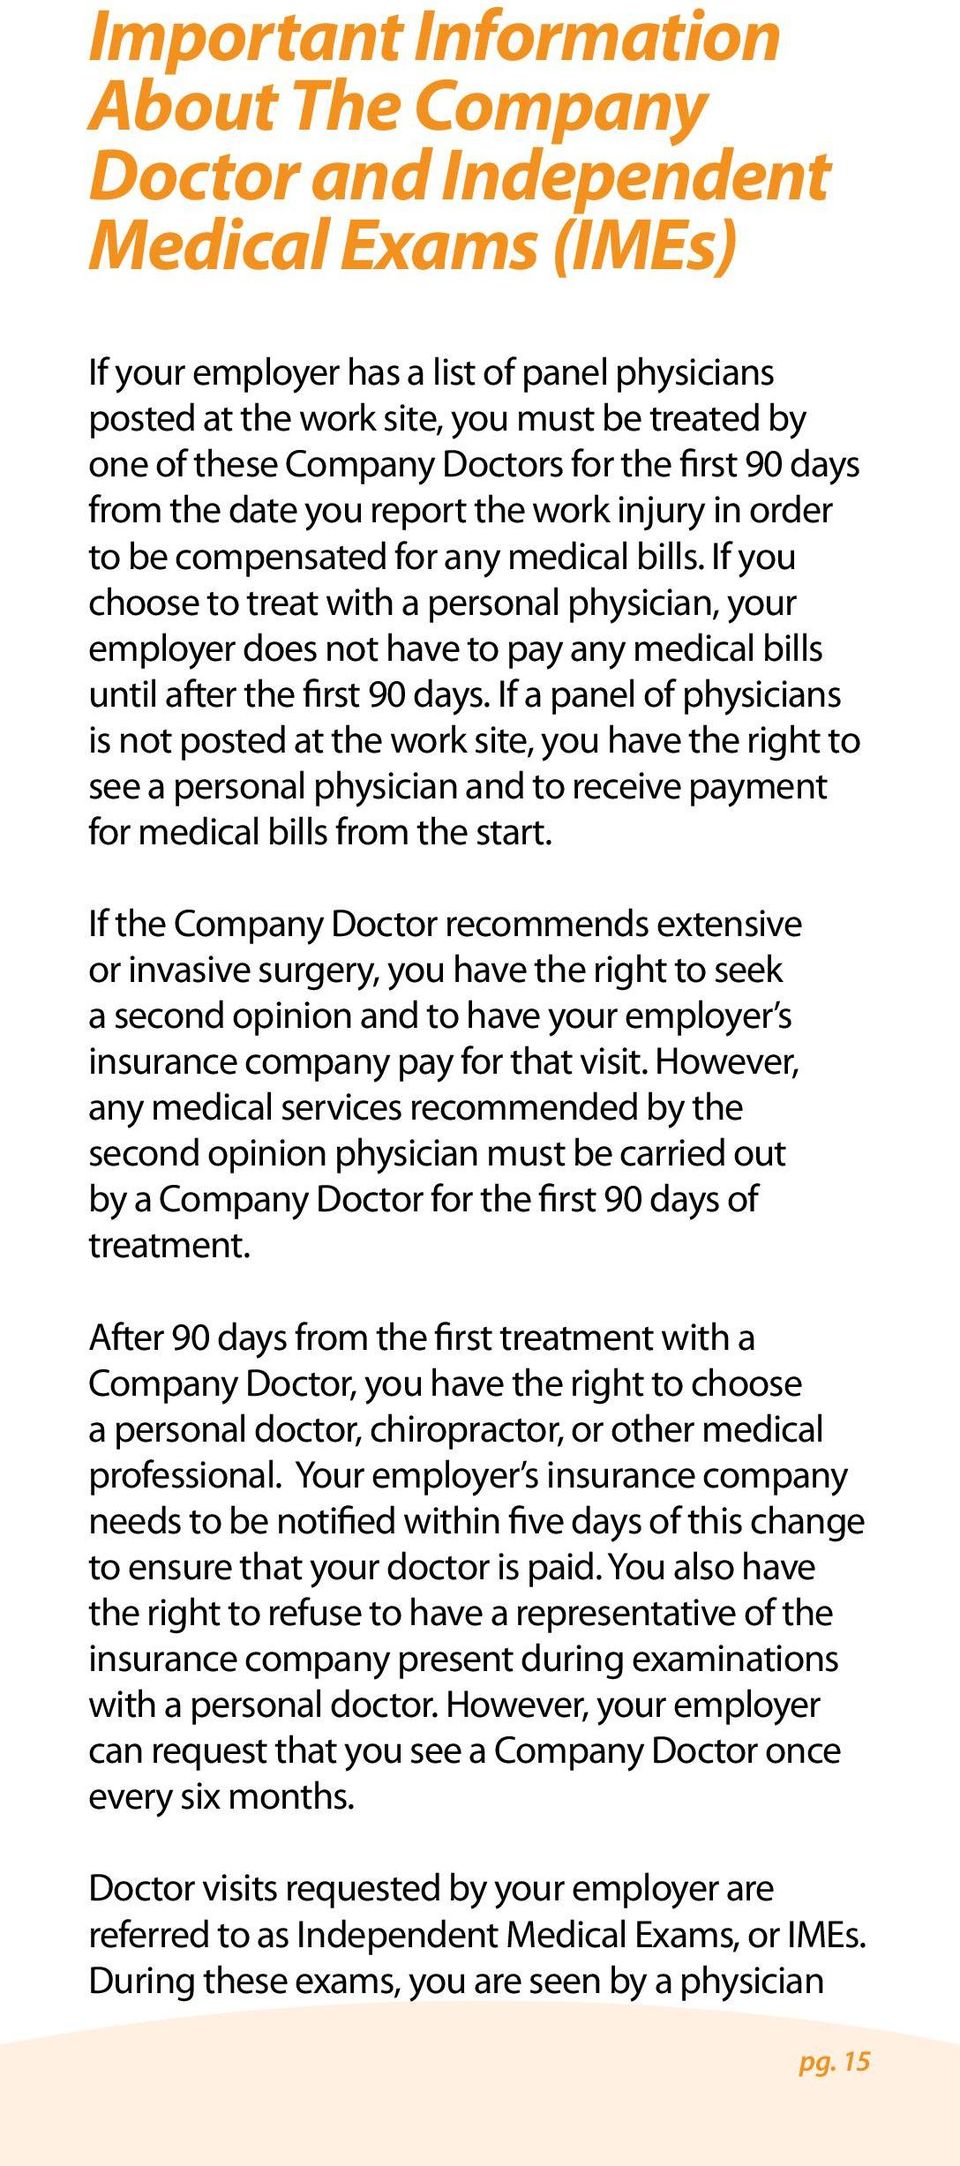 If you choose to treat with a personal physician, your employer does not have to pay any medical bills until after the first 90 days.